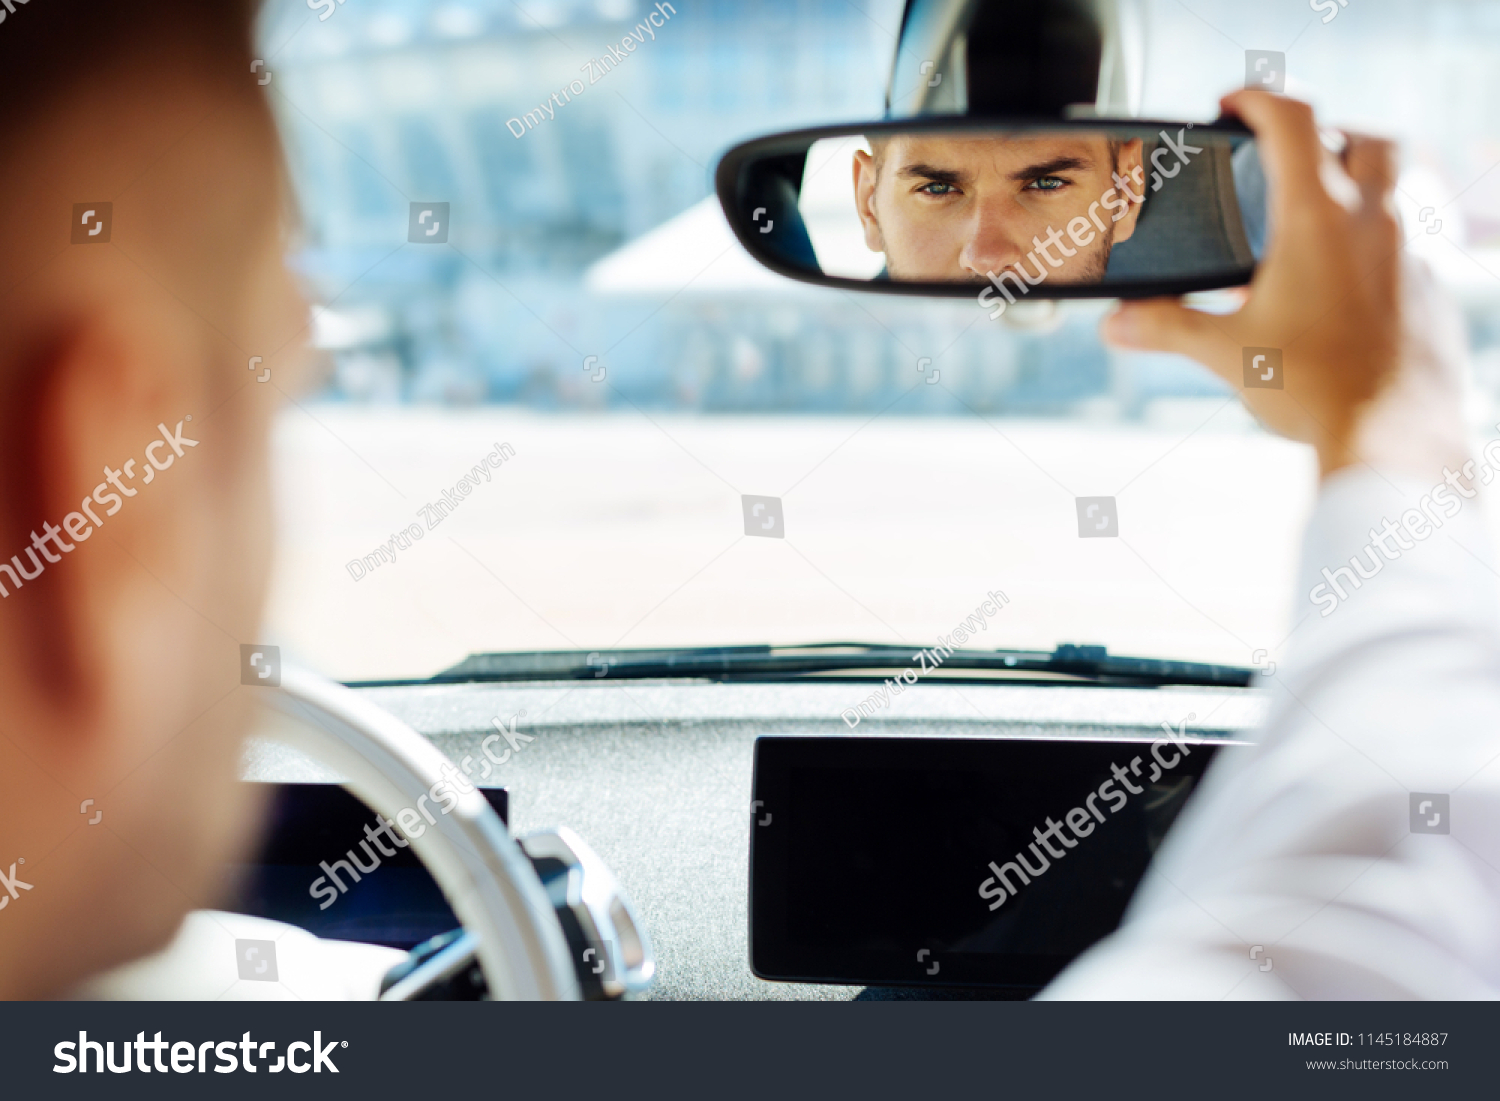 Professional driving. Confident smart man looking into the rearview mirror while driving his car #1145184887